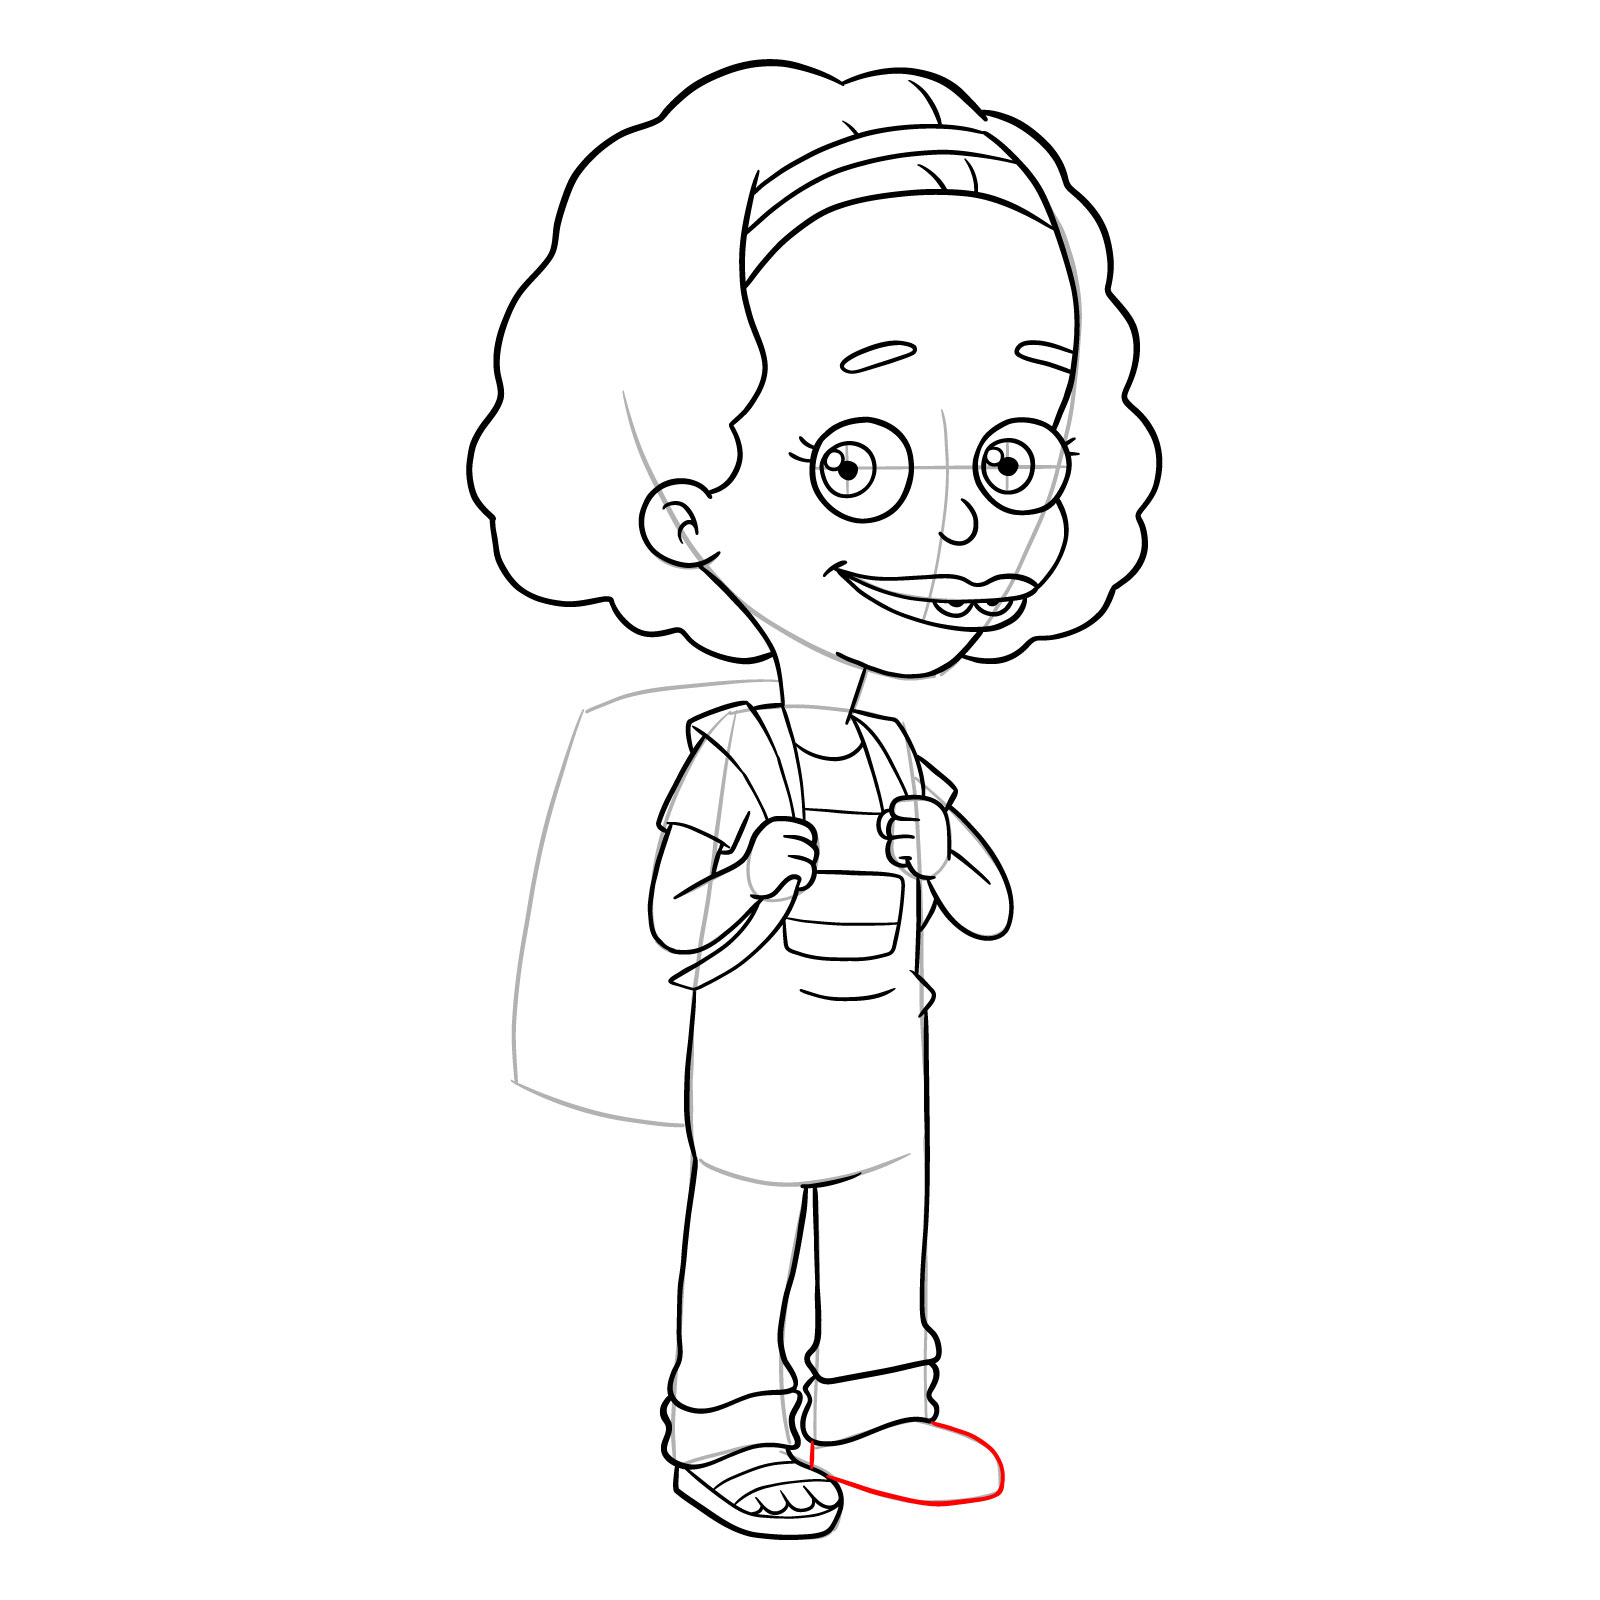 How to draw Missy from Big Mouth - step 27